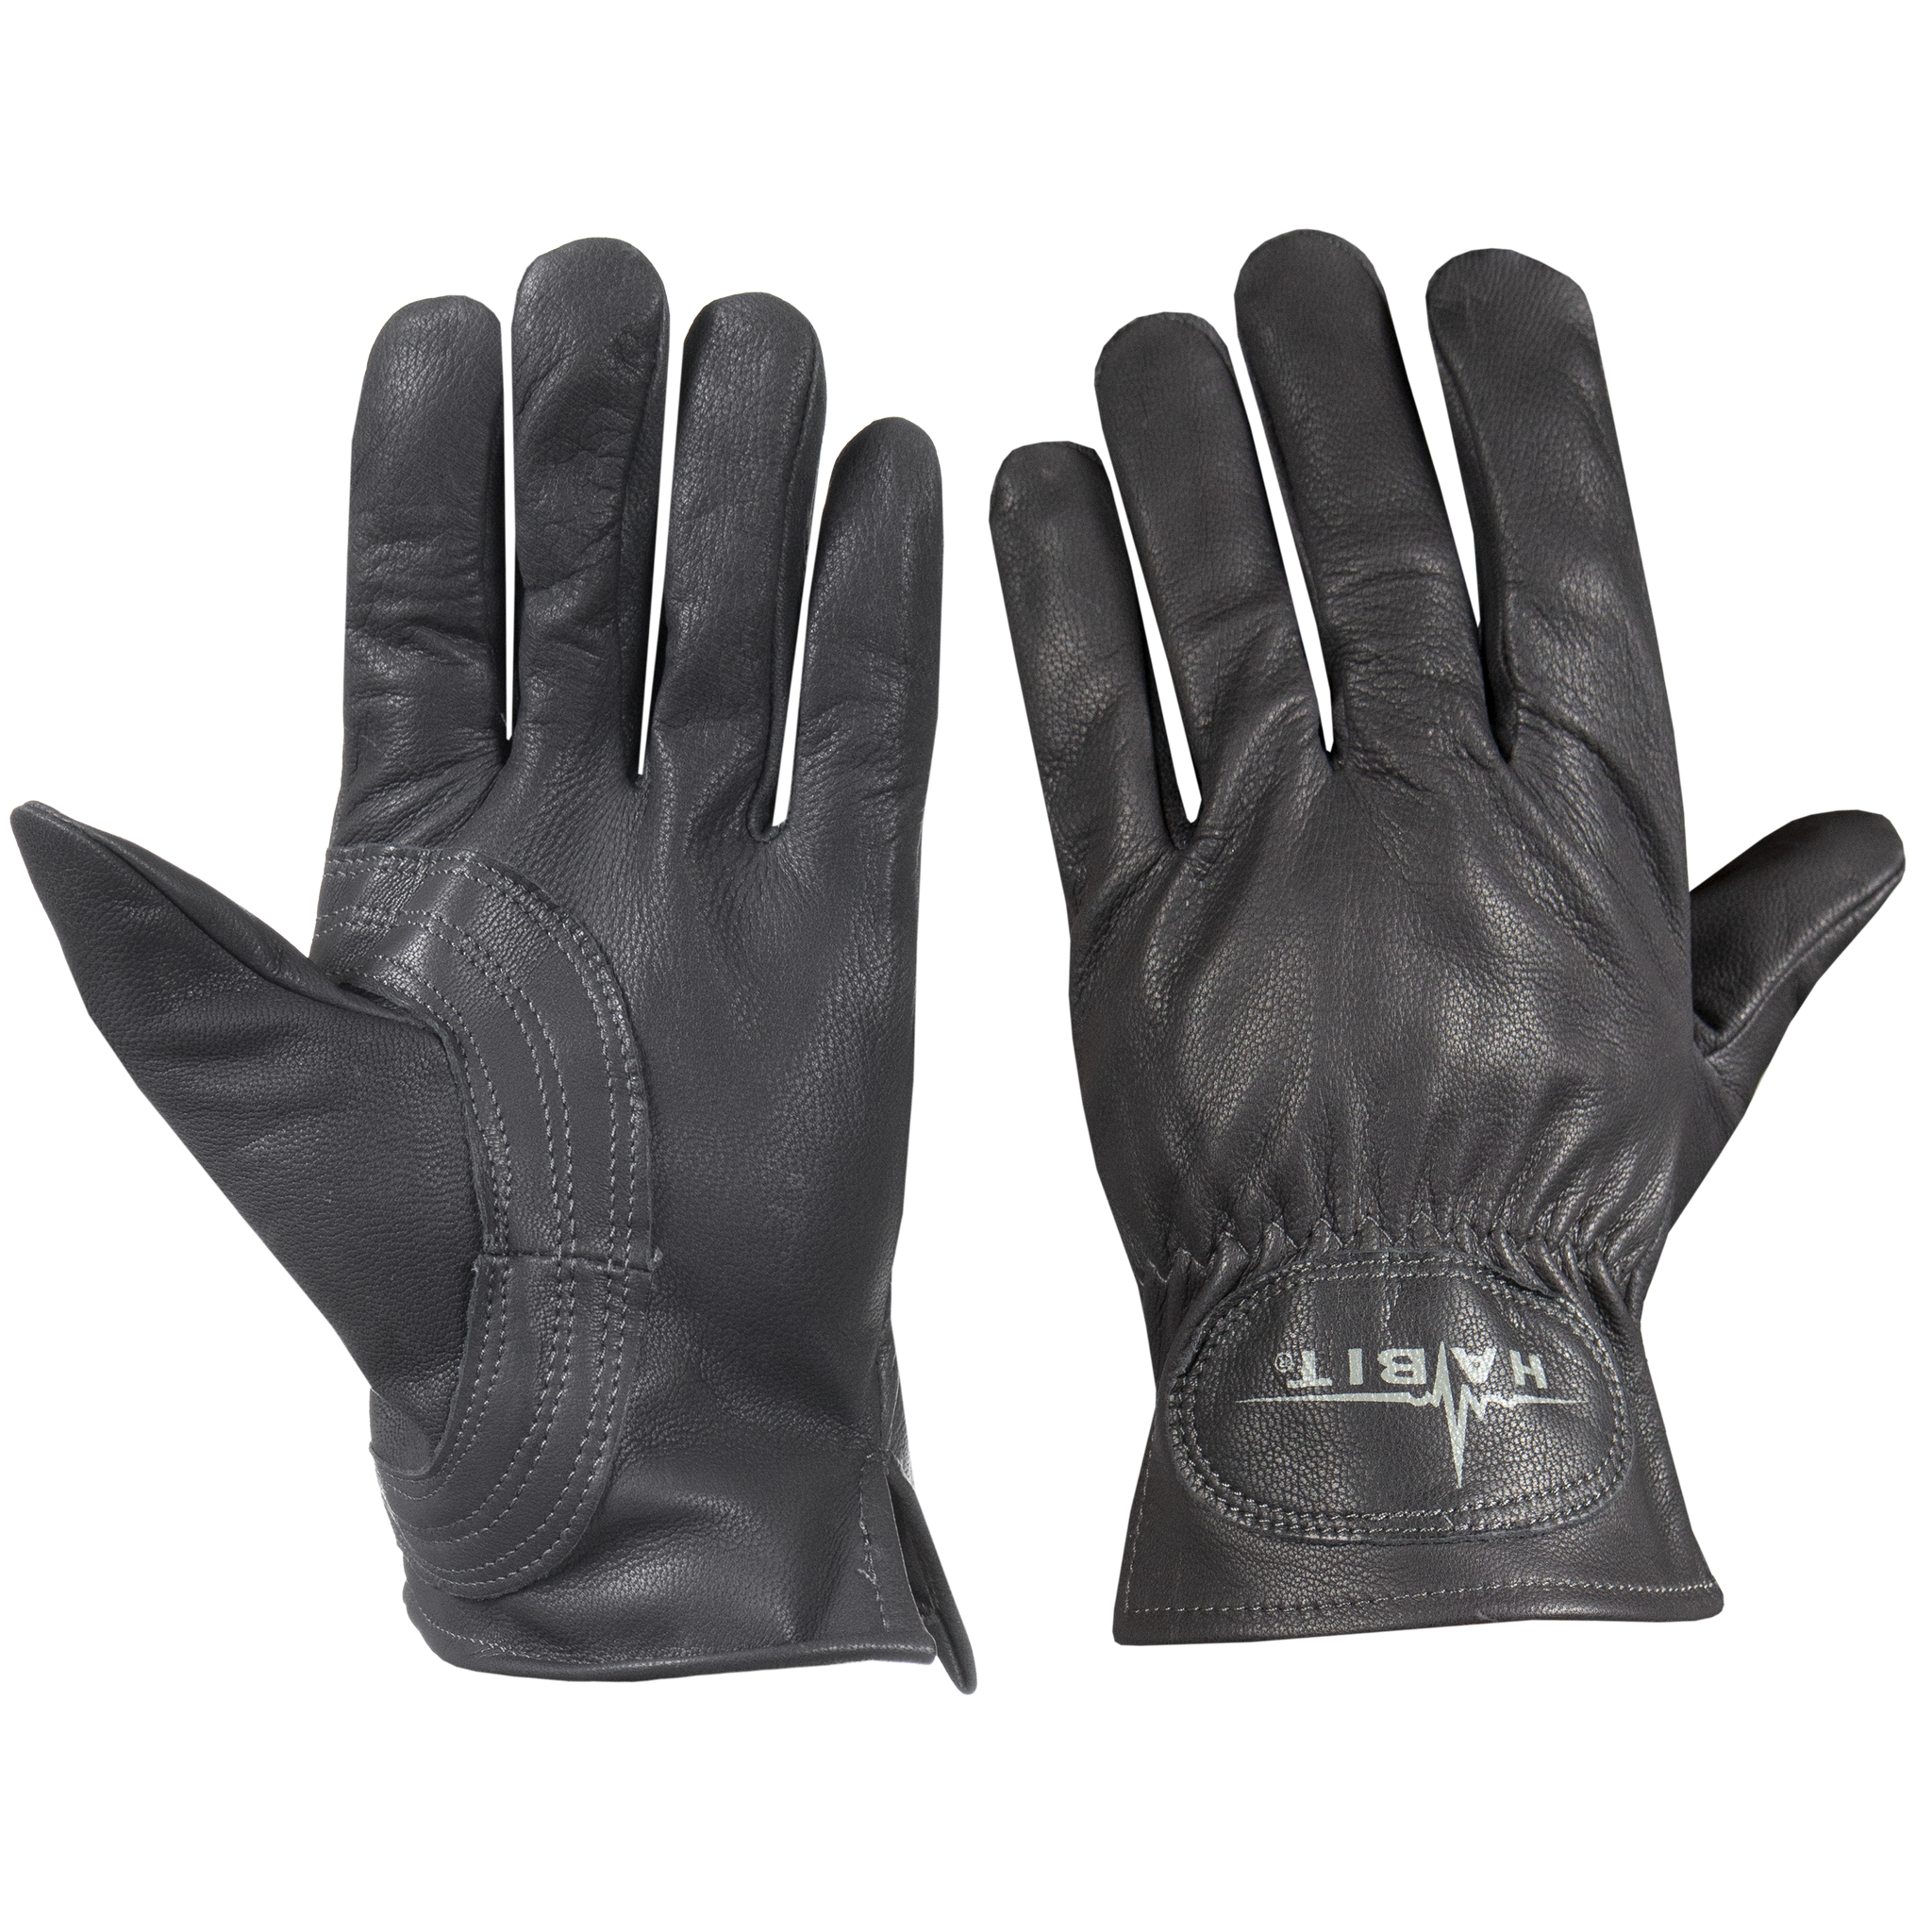 All-Purpose Leather Gloves